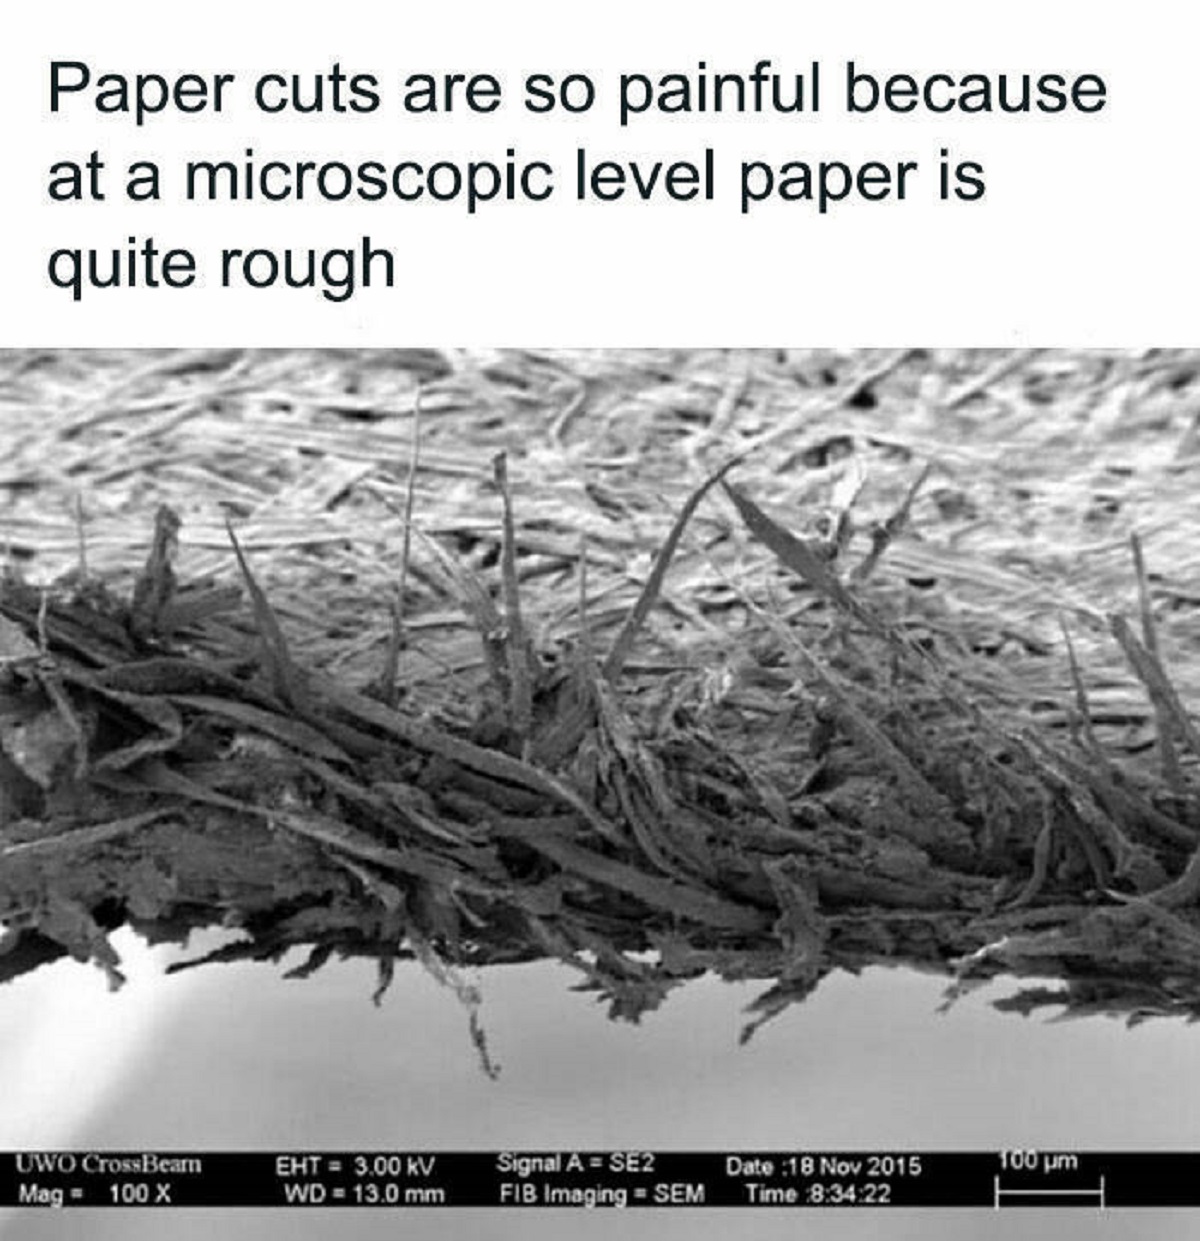 paper cut microscope - Paper cuts are so painful because at a microscopic level paper is quite rough Uwo CrossBearn Mag100 X Eht3.00 Kv Wd 13.0 mm Signal A SE2 Fib Imaging Sem Date 100 Time 22